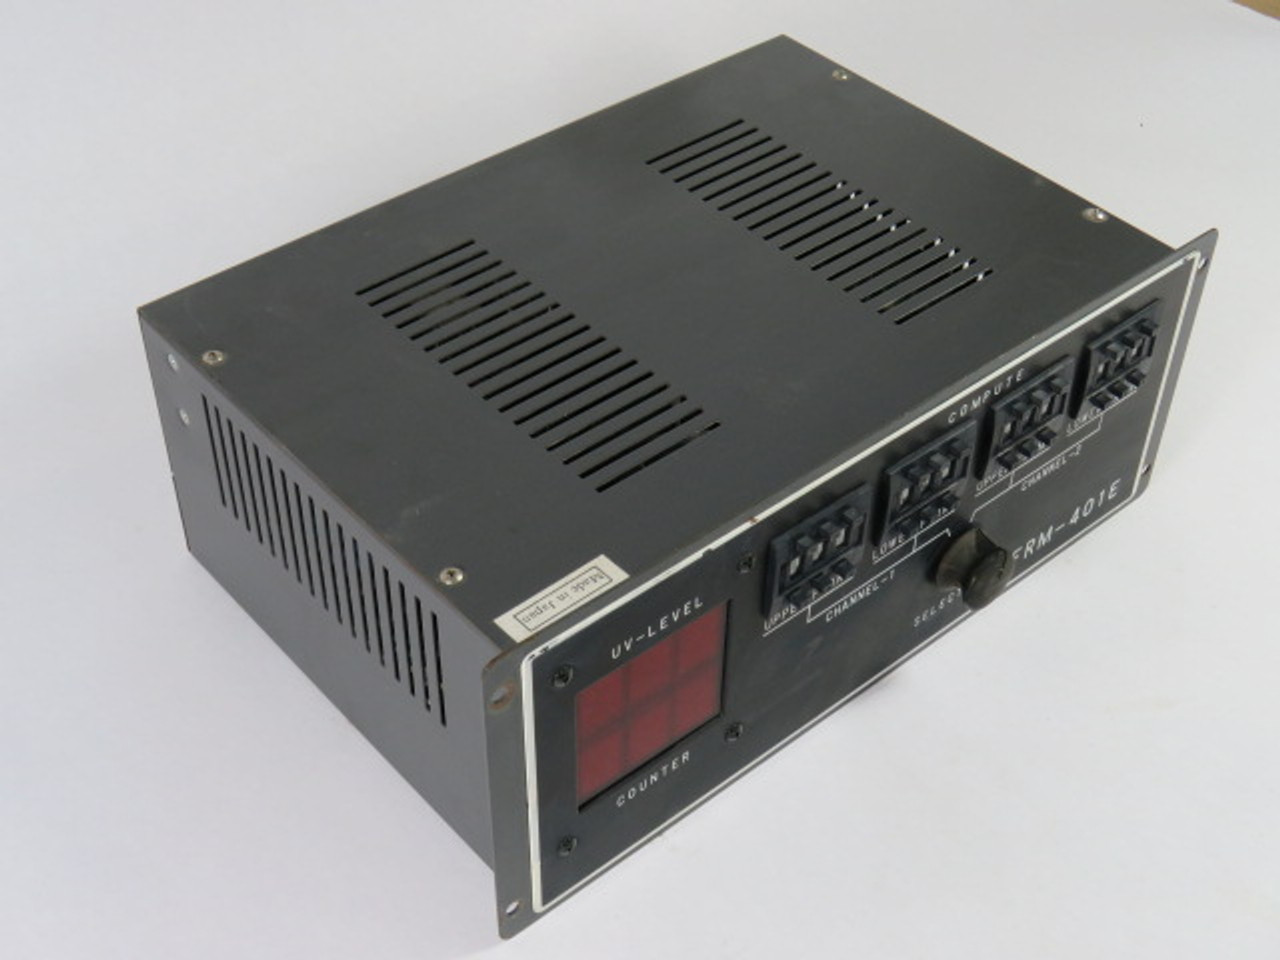 Generic FRM-401E Frequency Counter Panel 2-Channel USED